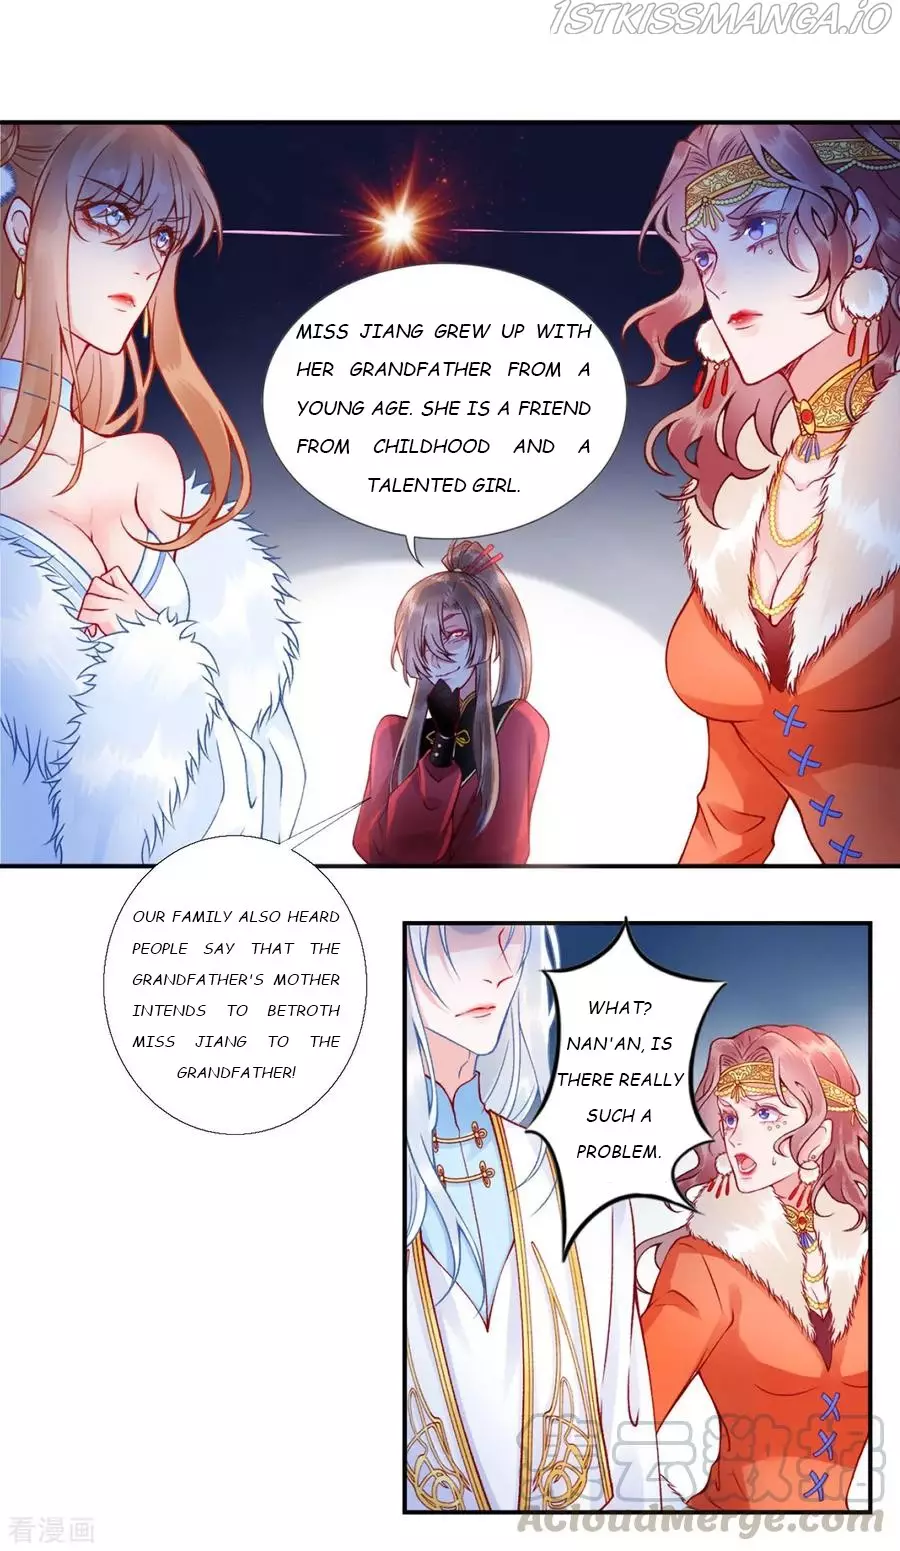 9000 Years Old Empress - 46 page 1-65949b07